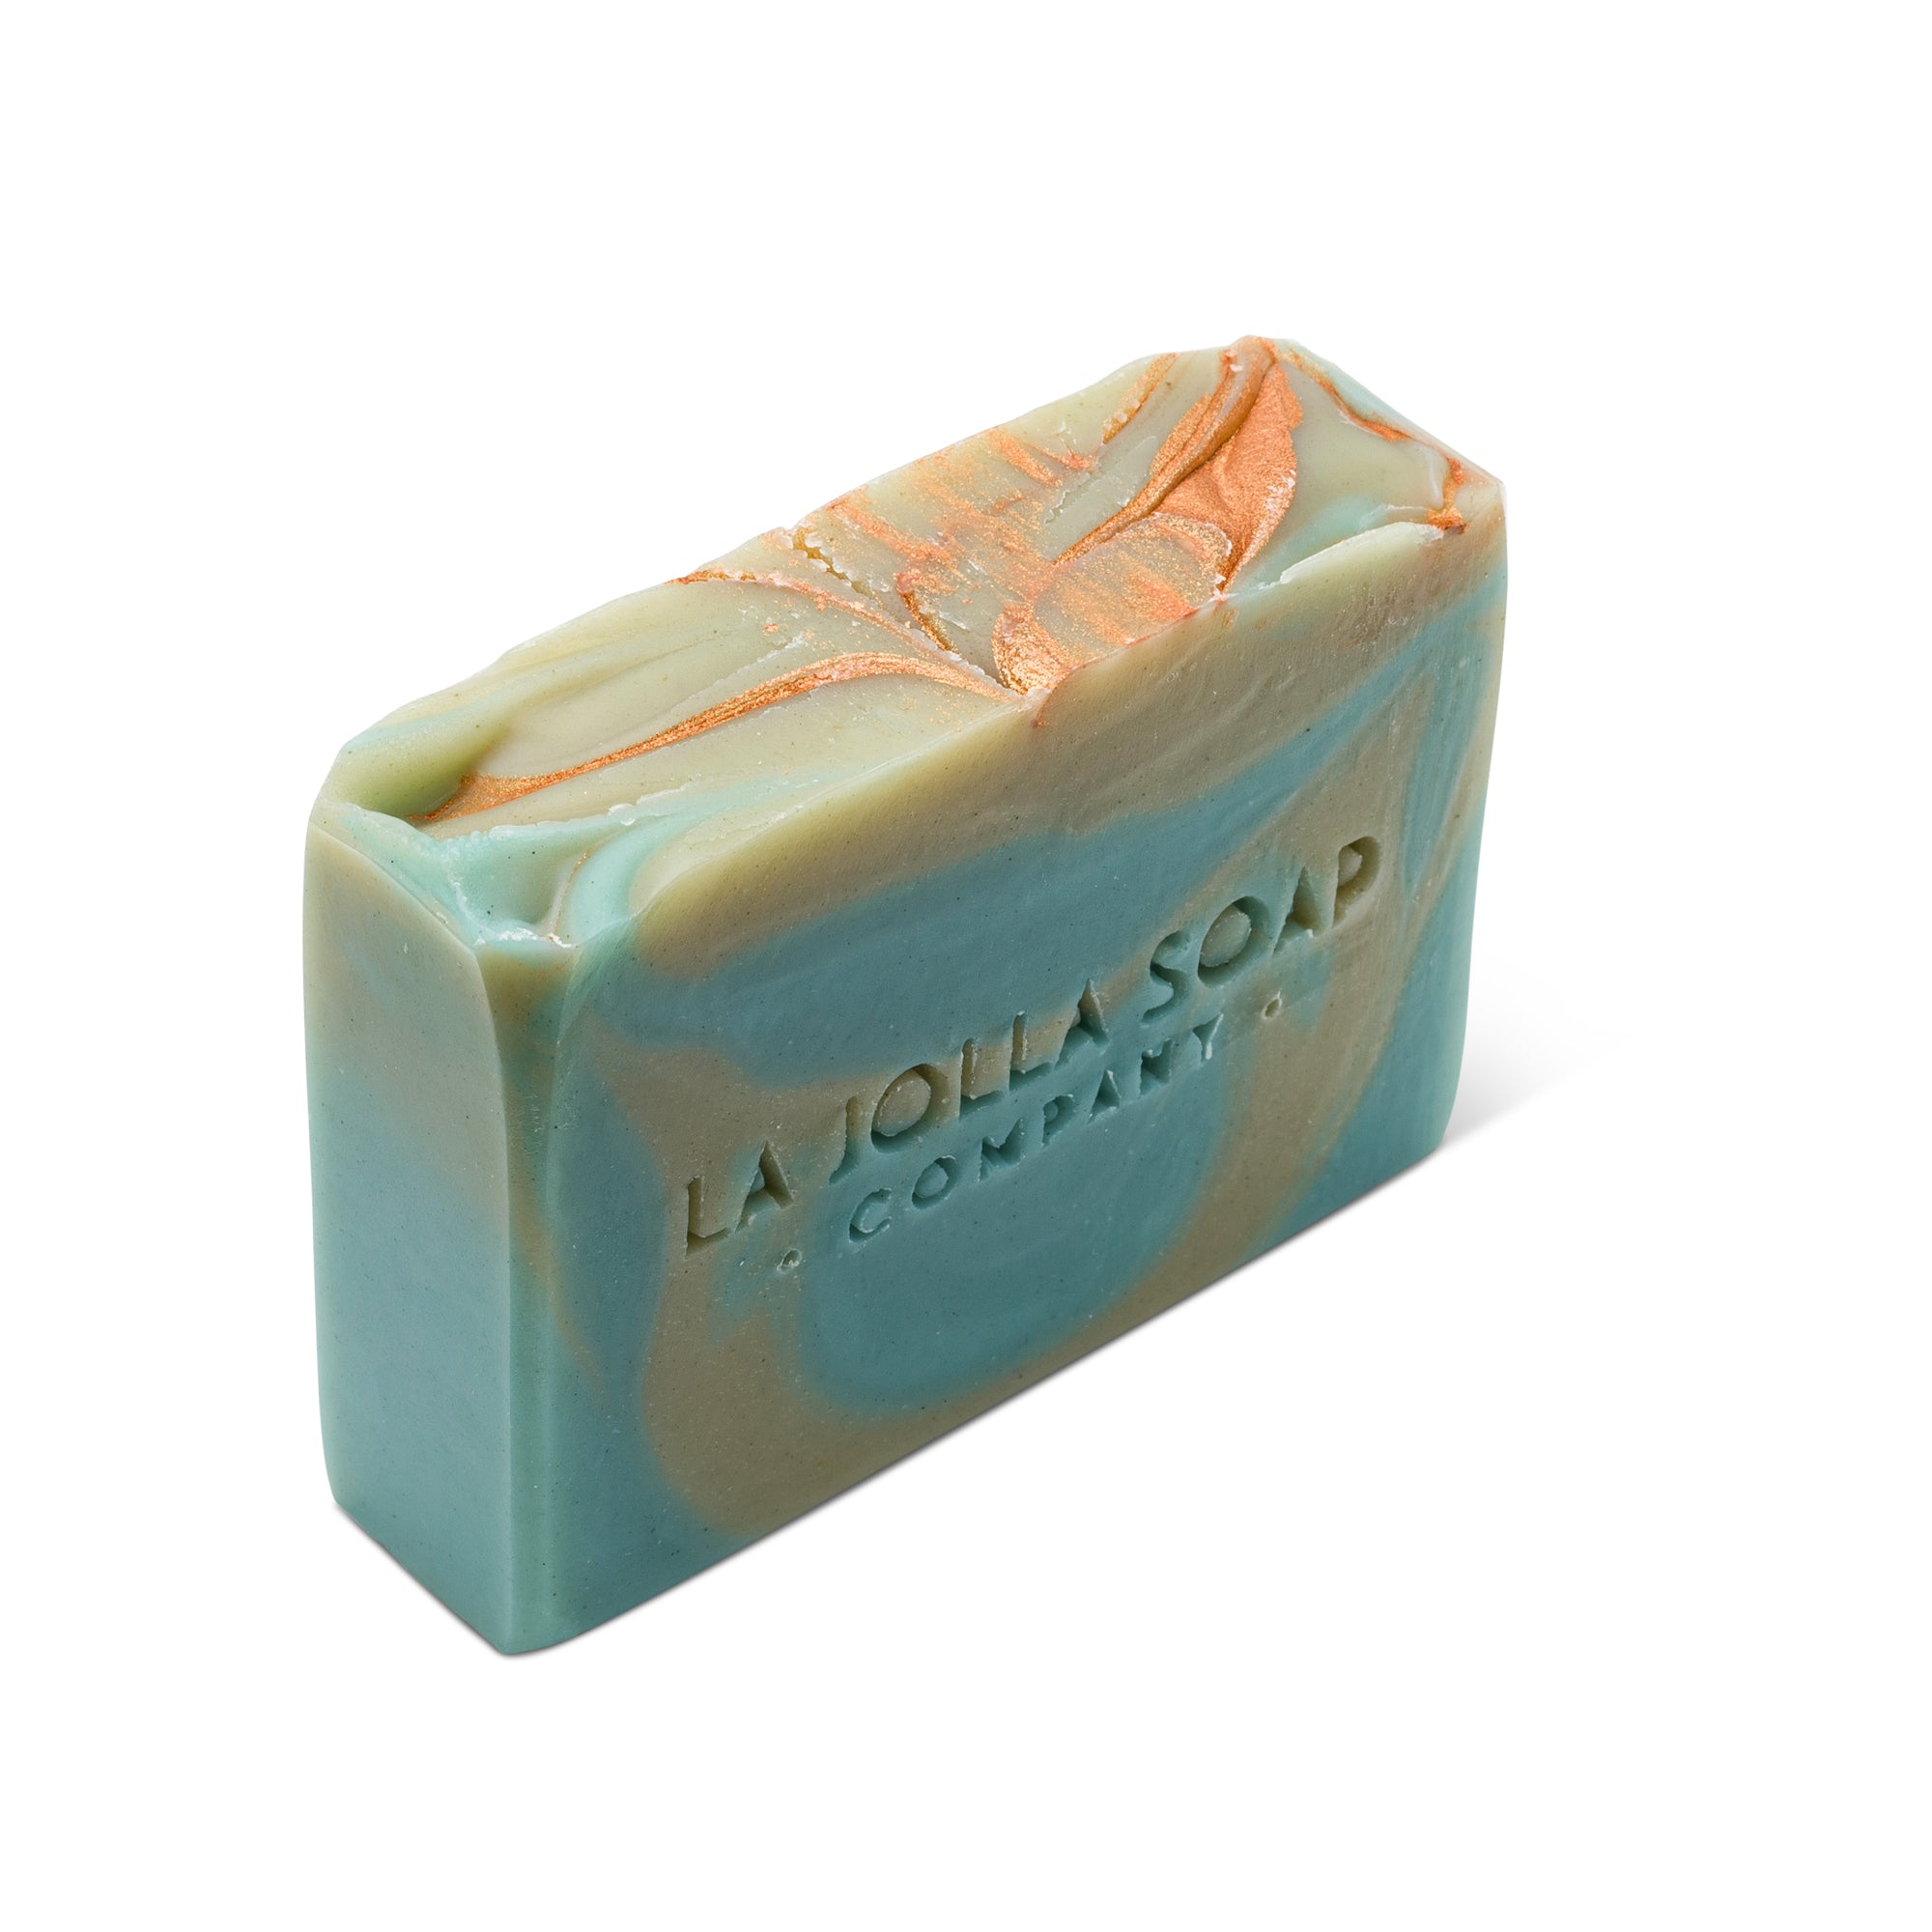 Top view of a Soap Bar that is indigo blue with sea green colored swirls, Top side has golden copper swirls. La Jolla Soap Company's Sea Clay Soap